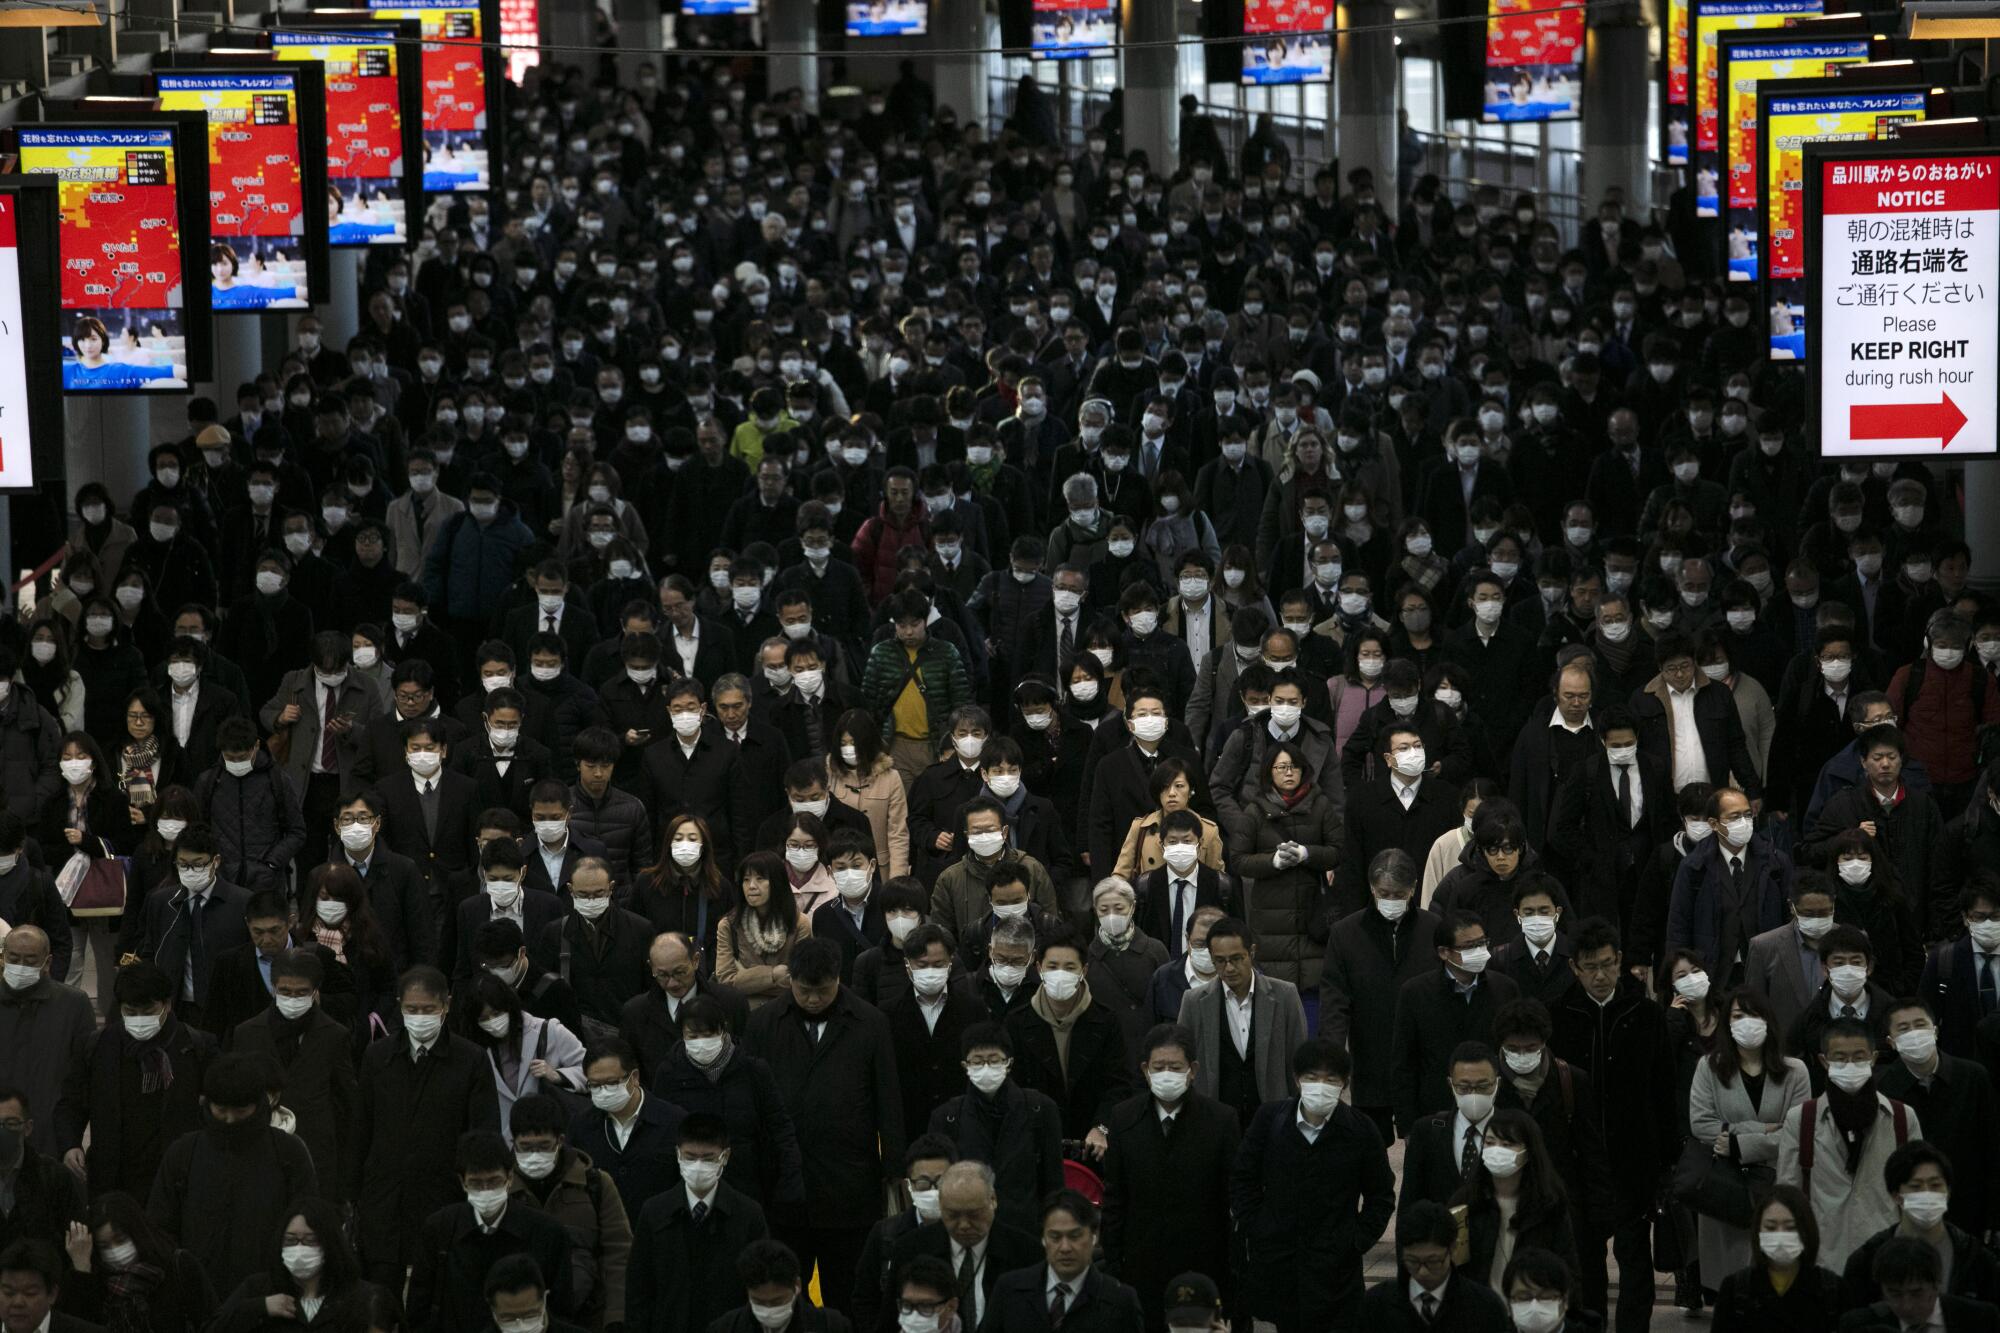 A large crowd of mask-wearing commuters 